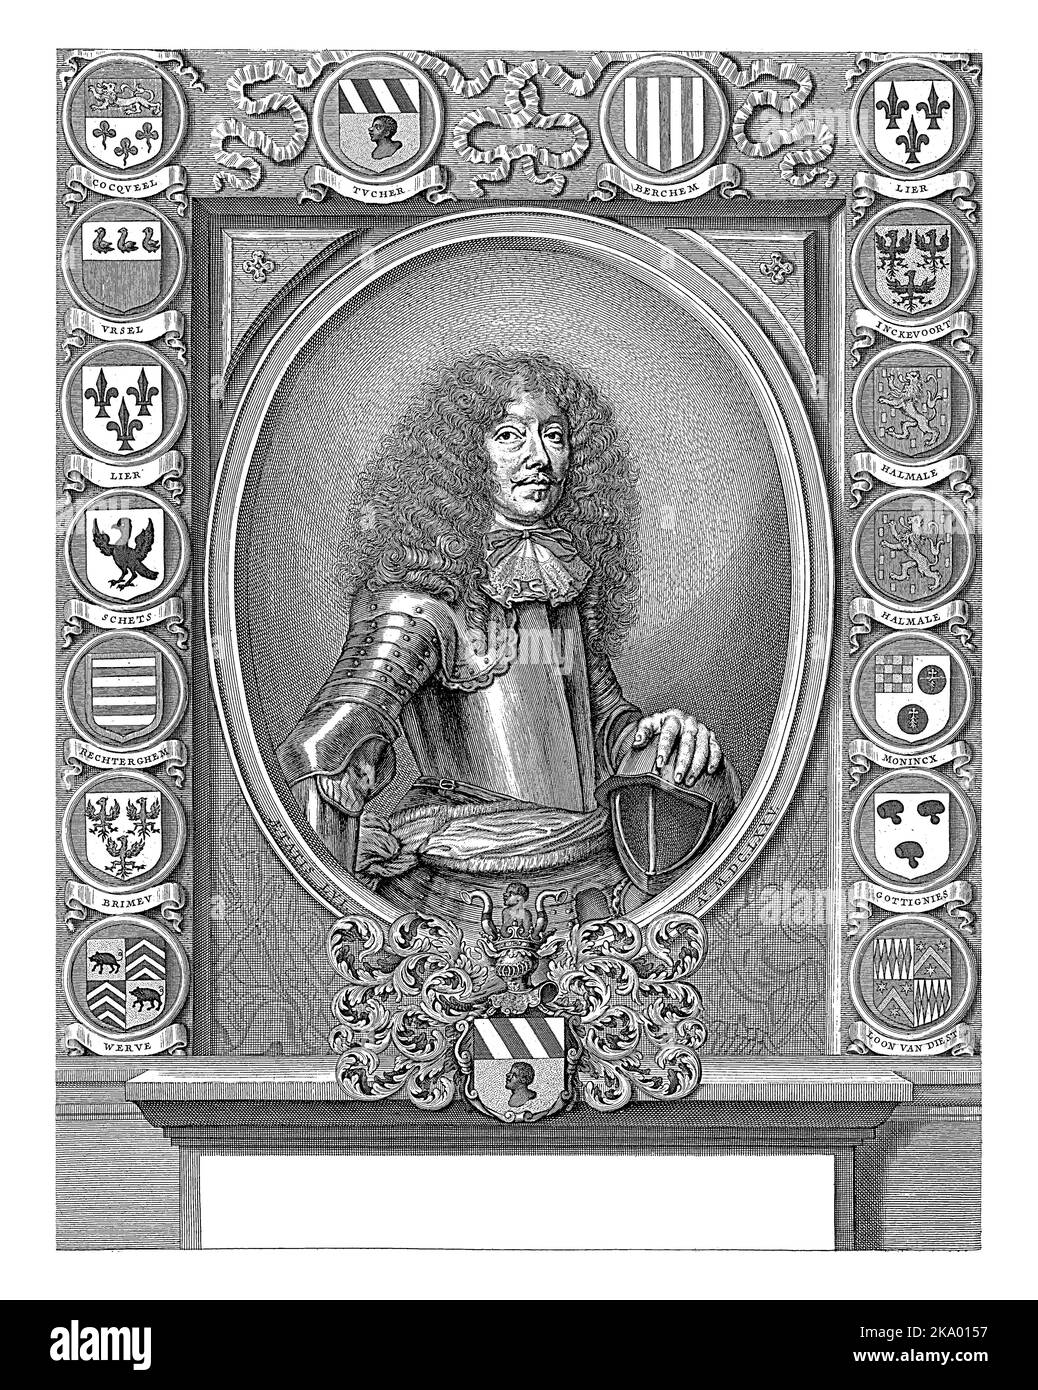 Portrait of Johannes Antonius Tucher, 56 years old, in armor, his hand resting on a helmet. Below the portrait his family crest. Stock Photo